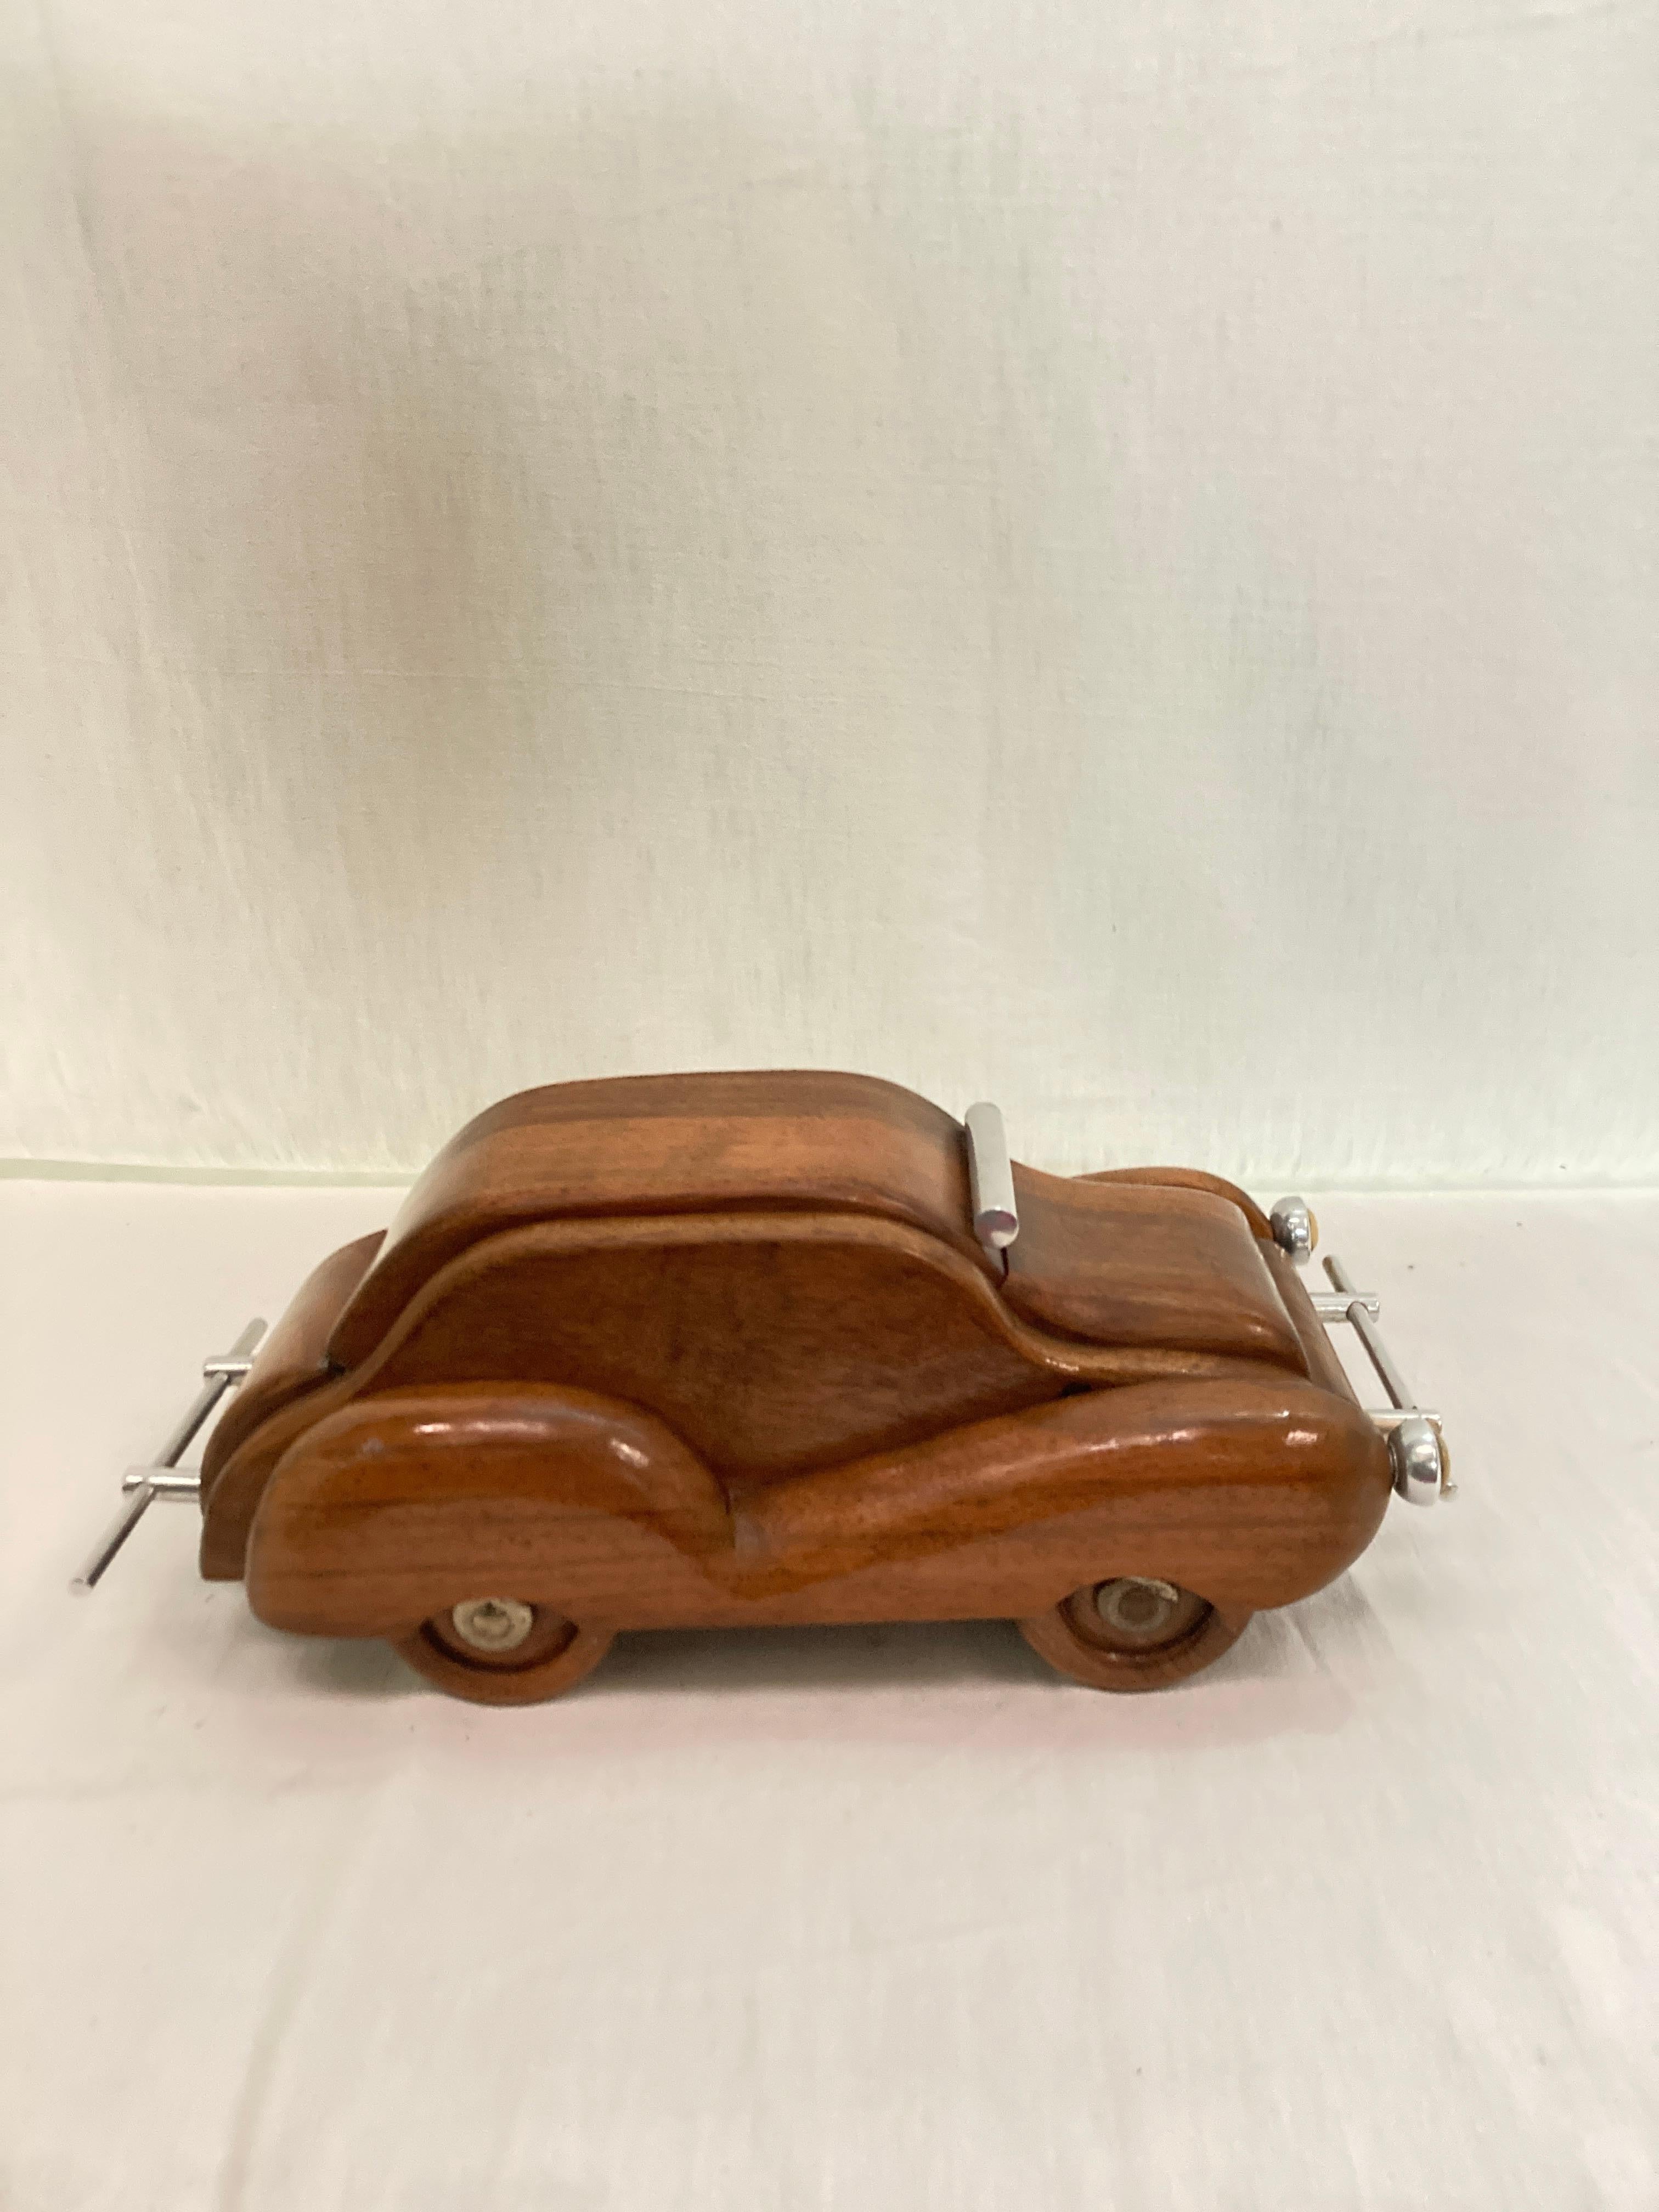 Very nice and unusual car boxe
Made with walnut
Circa 1950's